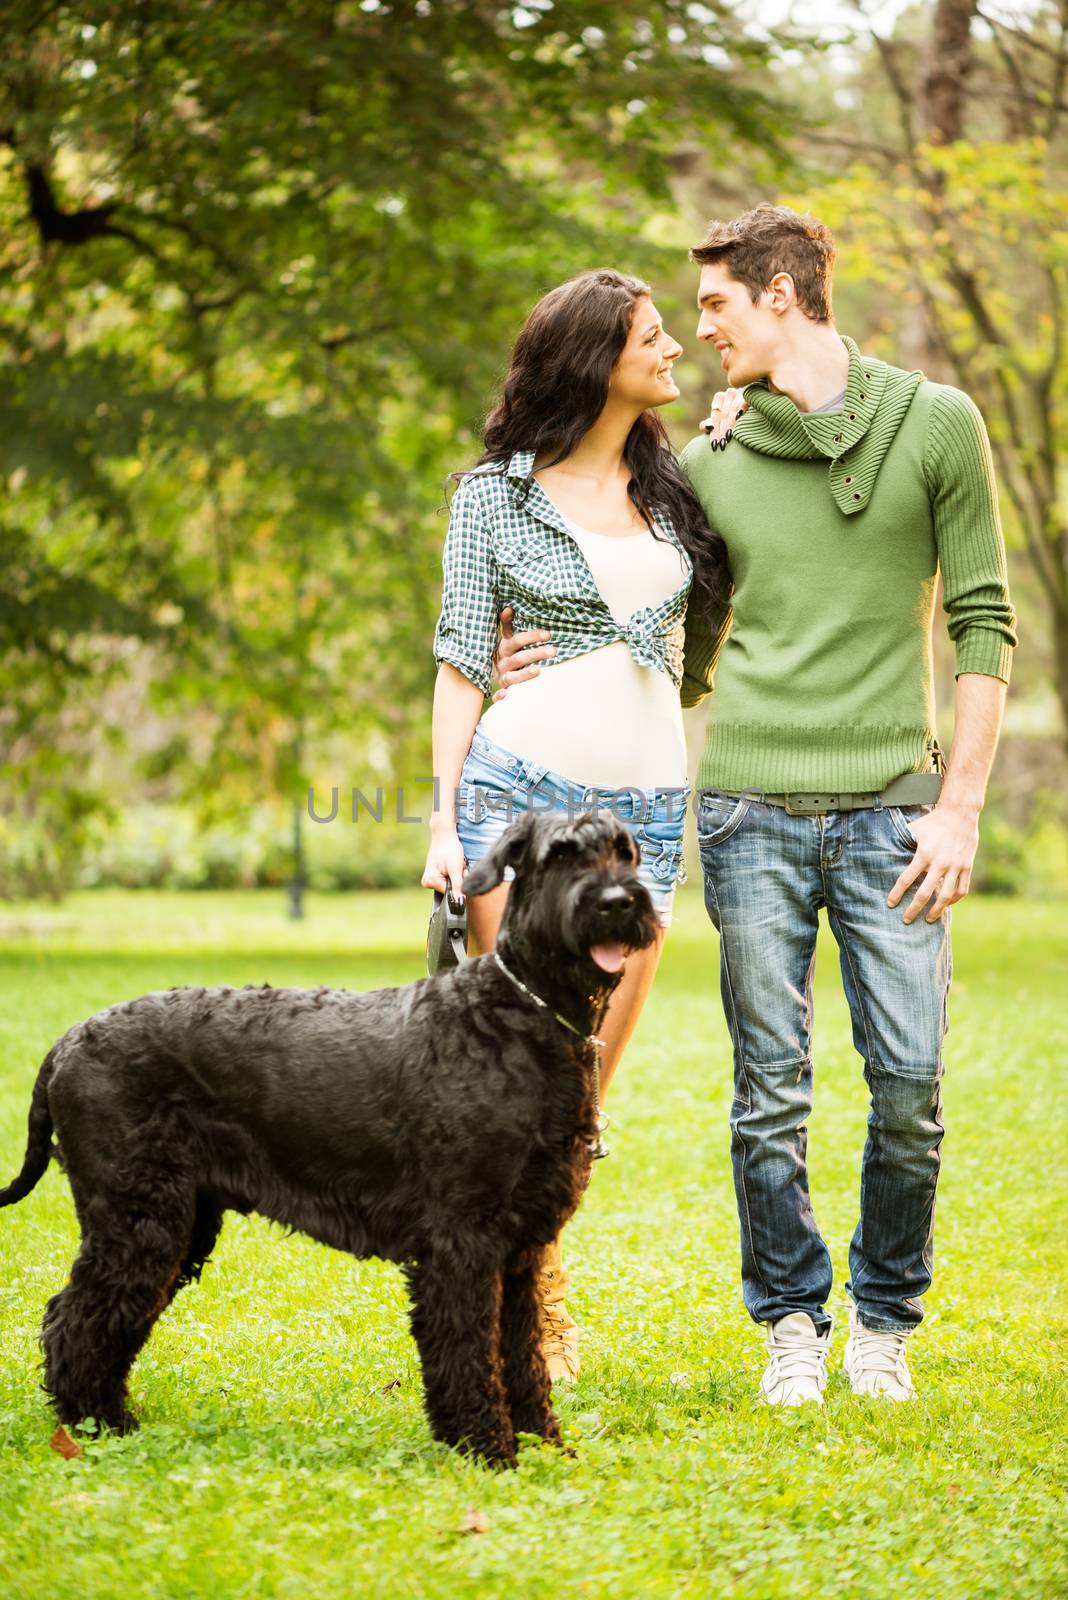 Young handsome heterosexual couple with a dog, a black giant schnauzer, enjoy a walk through the park.